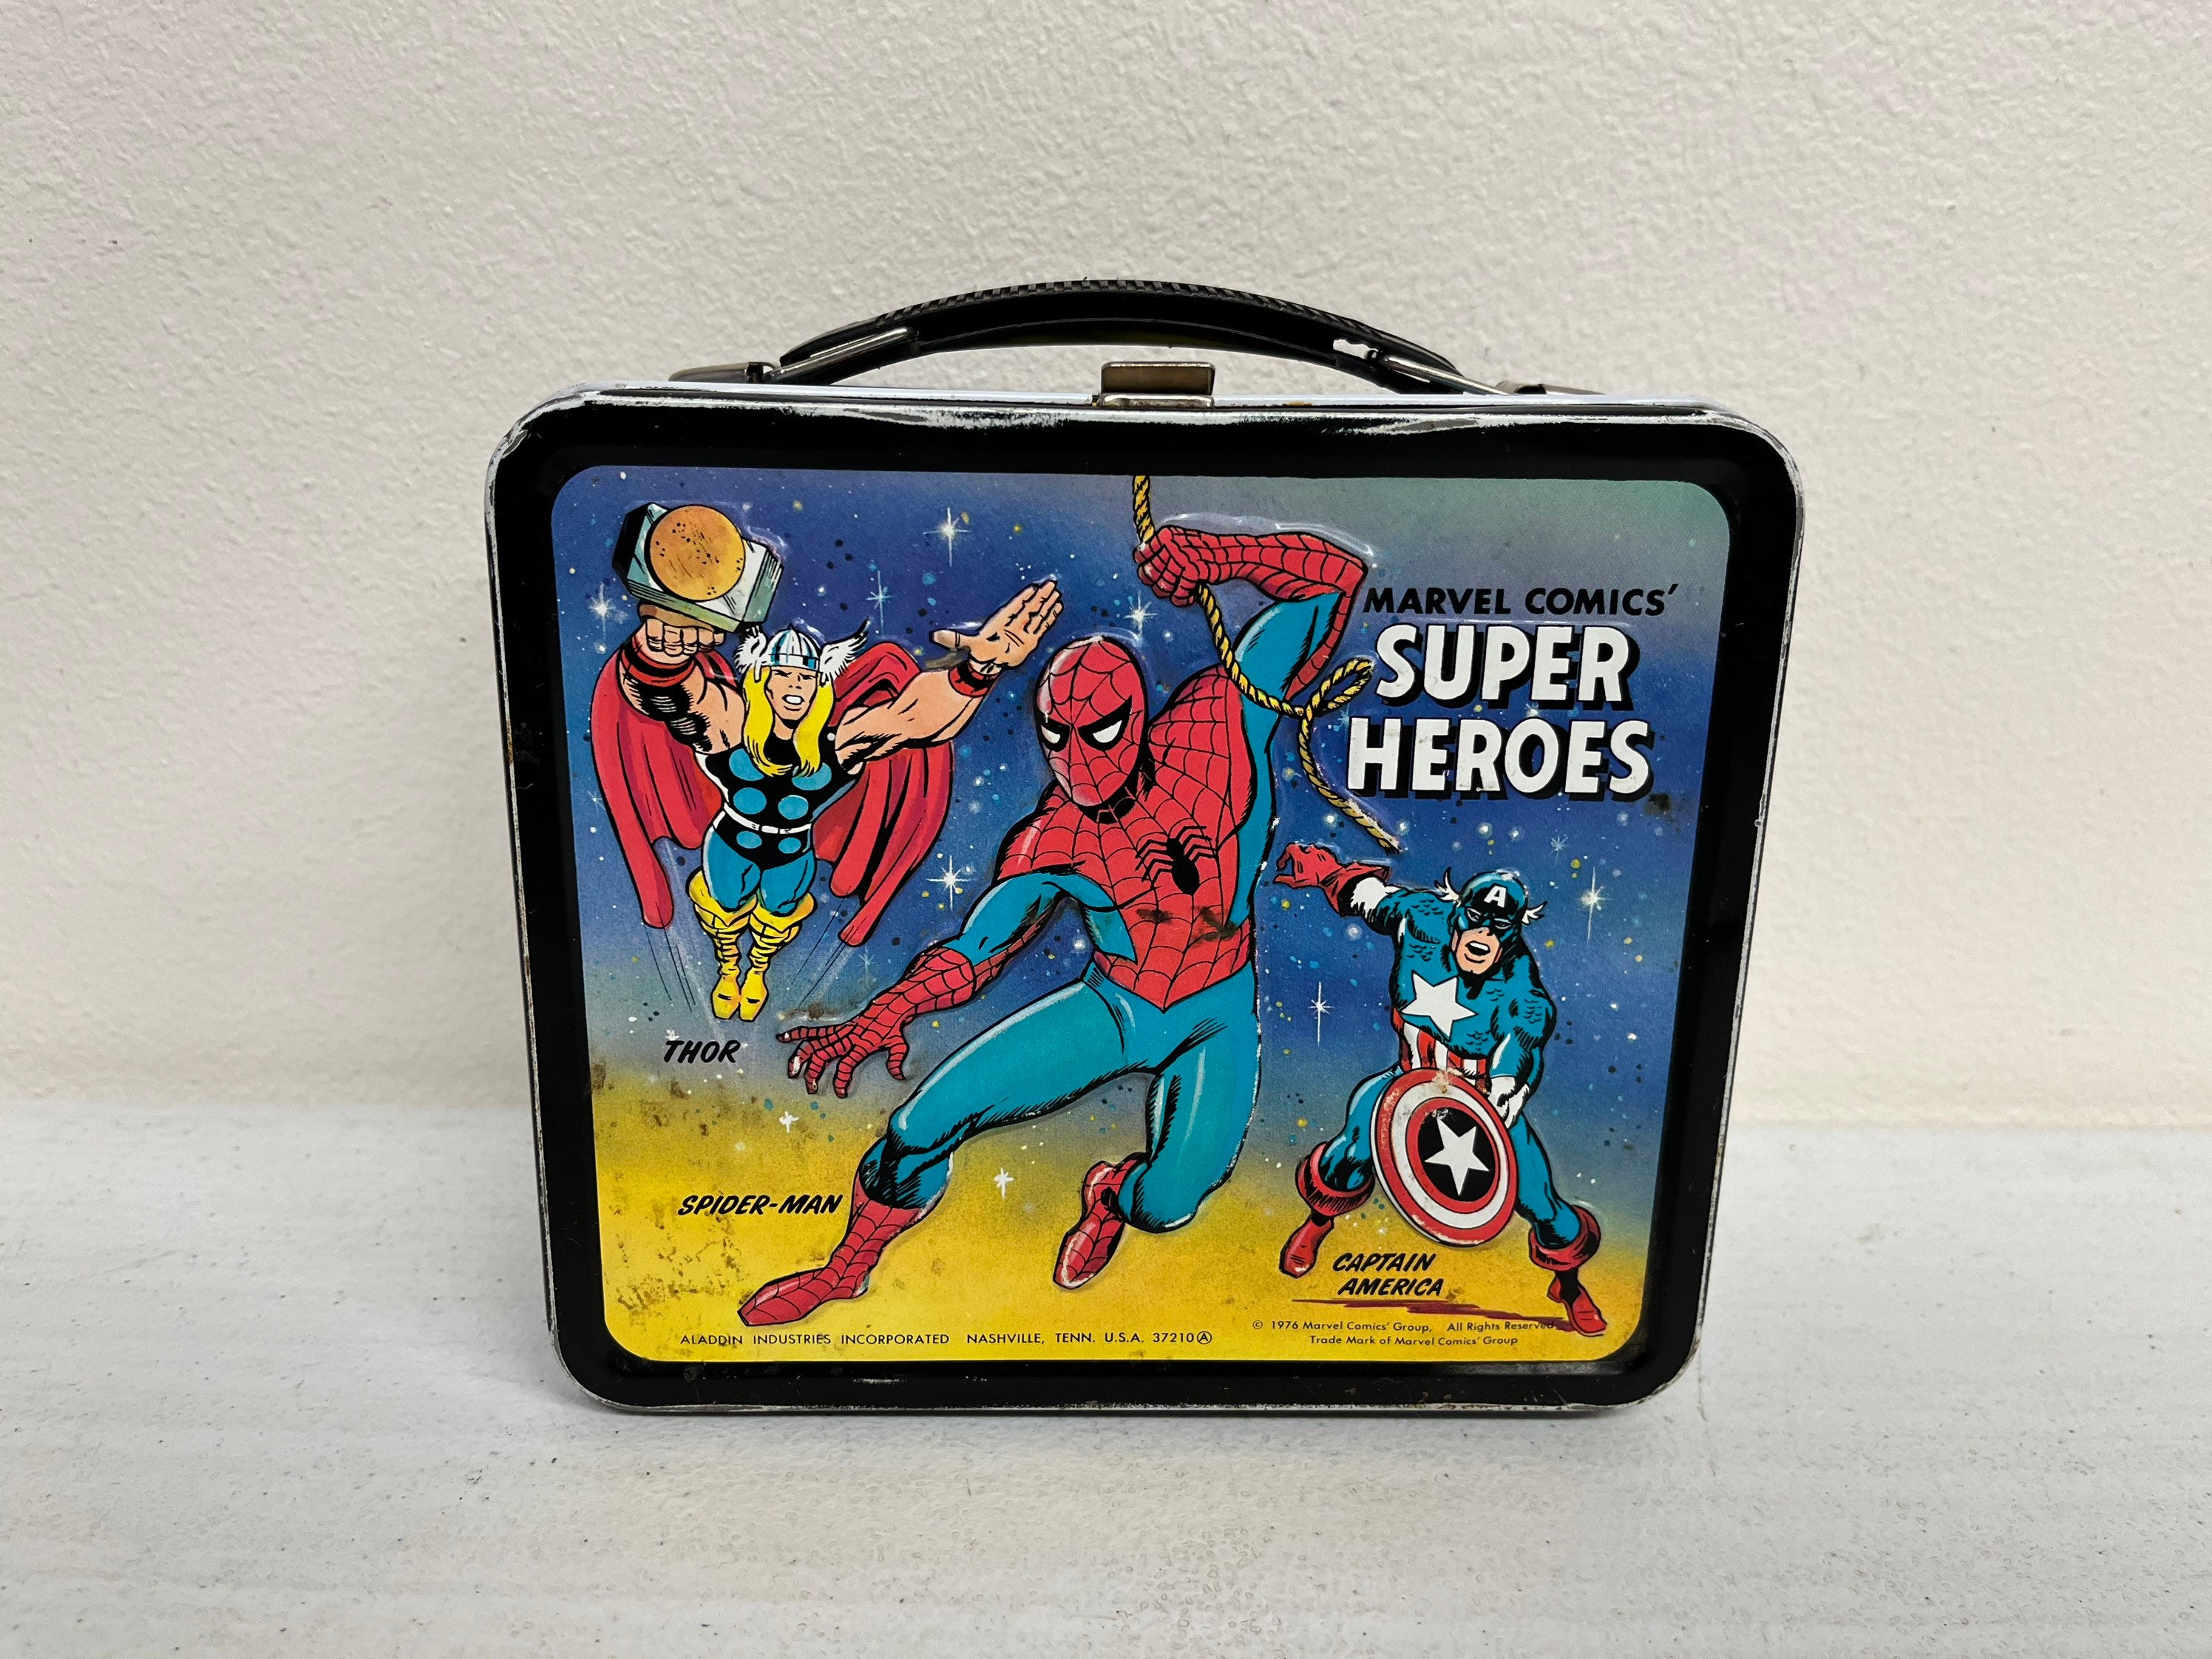  Marvel Shop Spiderman Lunch Bag For Boys, Kids Bundle ~  Spiderman Lunch Box And Cars Water Bottle Set For Spiderman School Supplies  With Spiderman Stickers And More (Superhero School Lunch) 